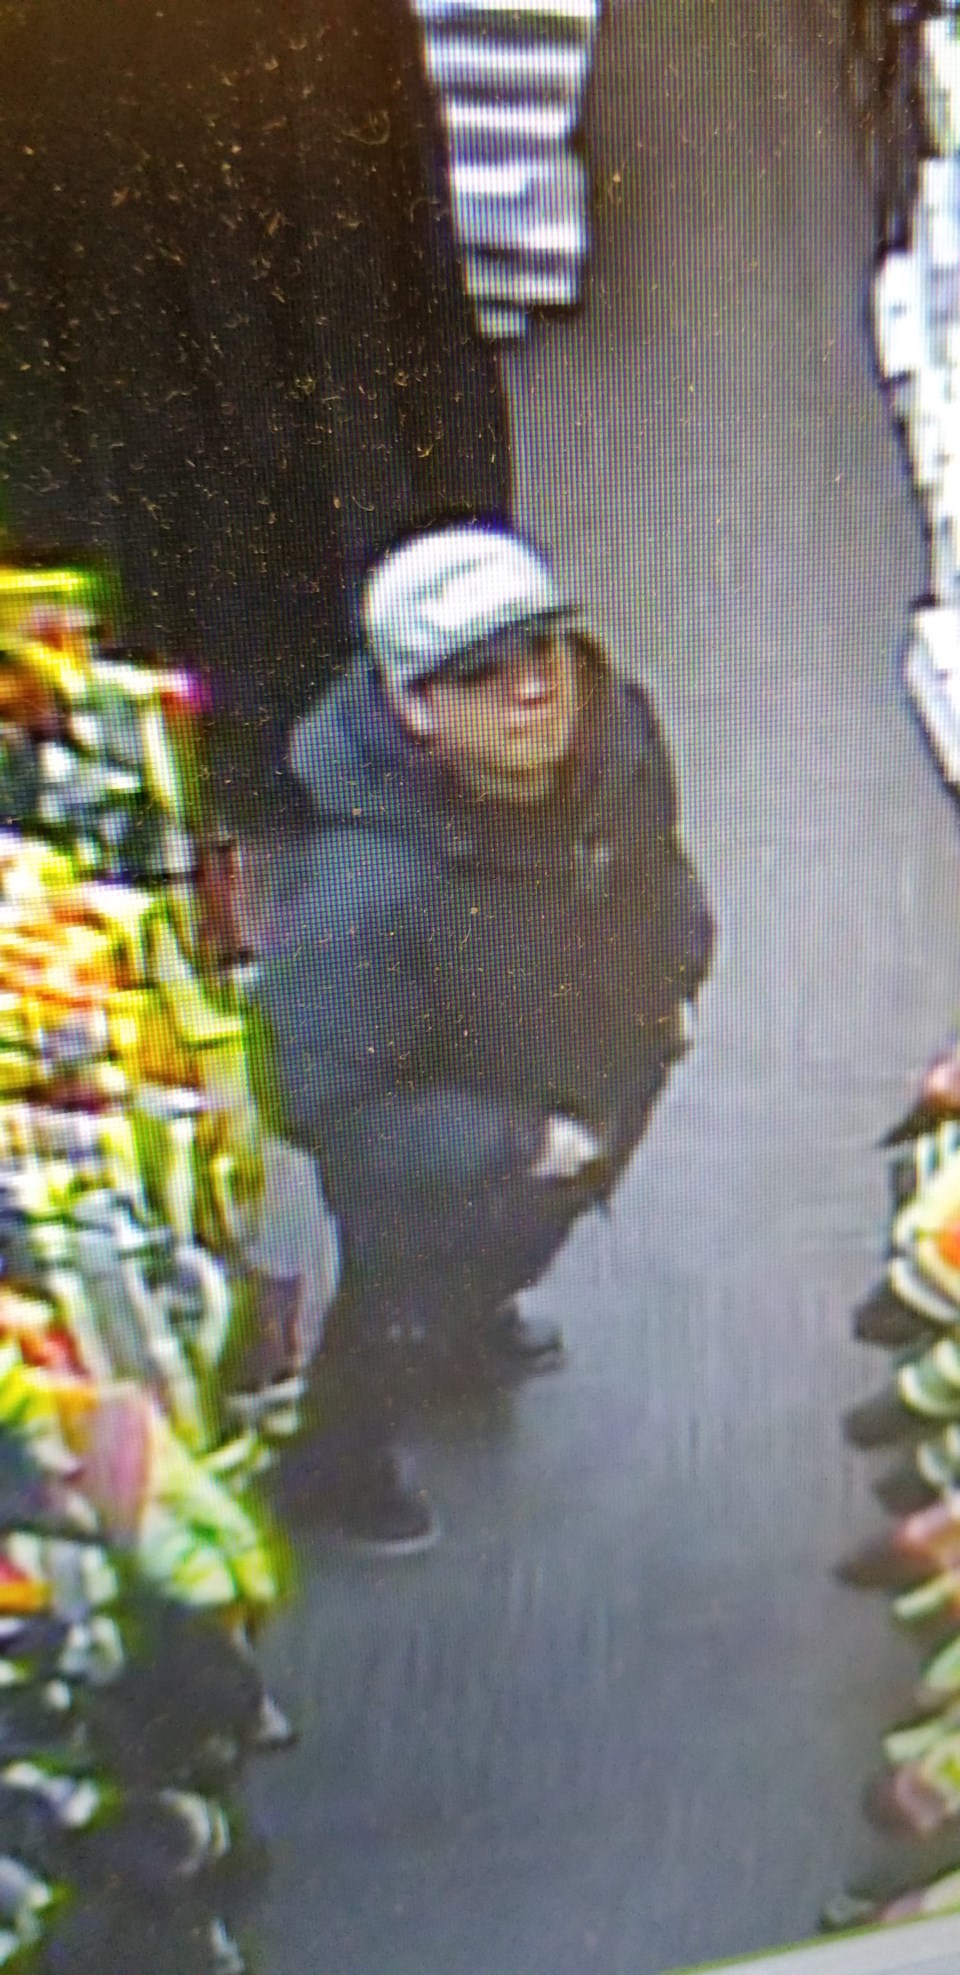 Thompson RCMP are asking for help identifying this man who stole the till from Mark’s Work Wearhouse